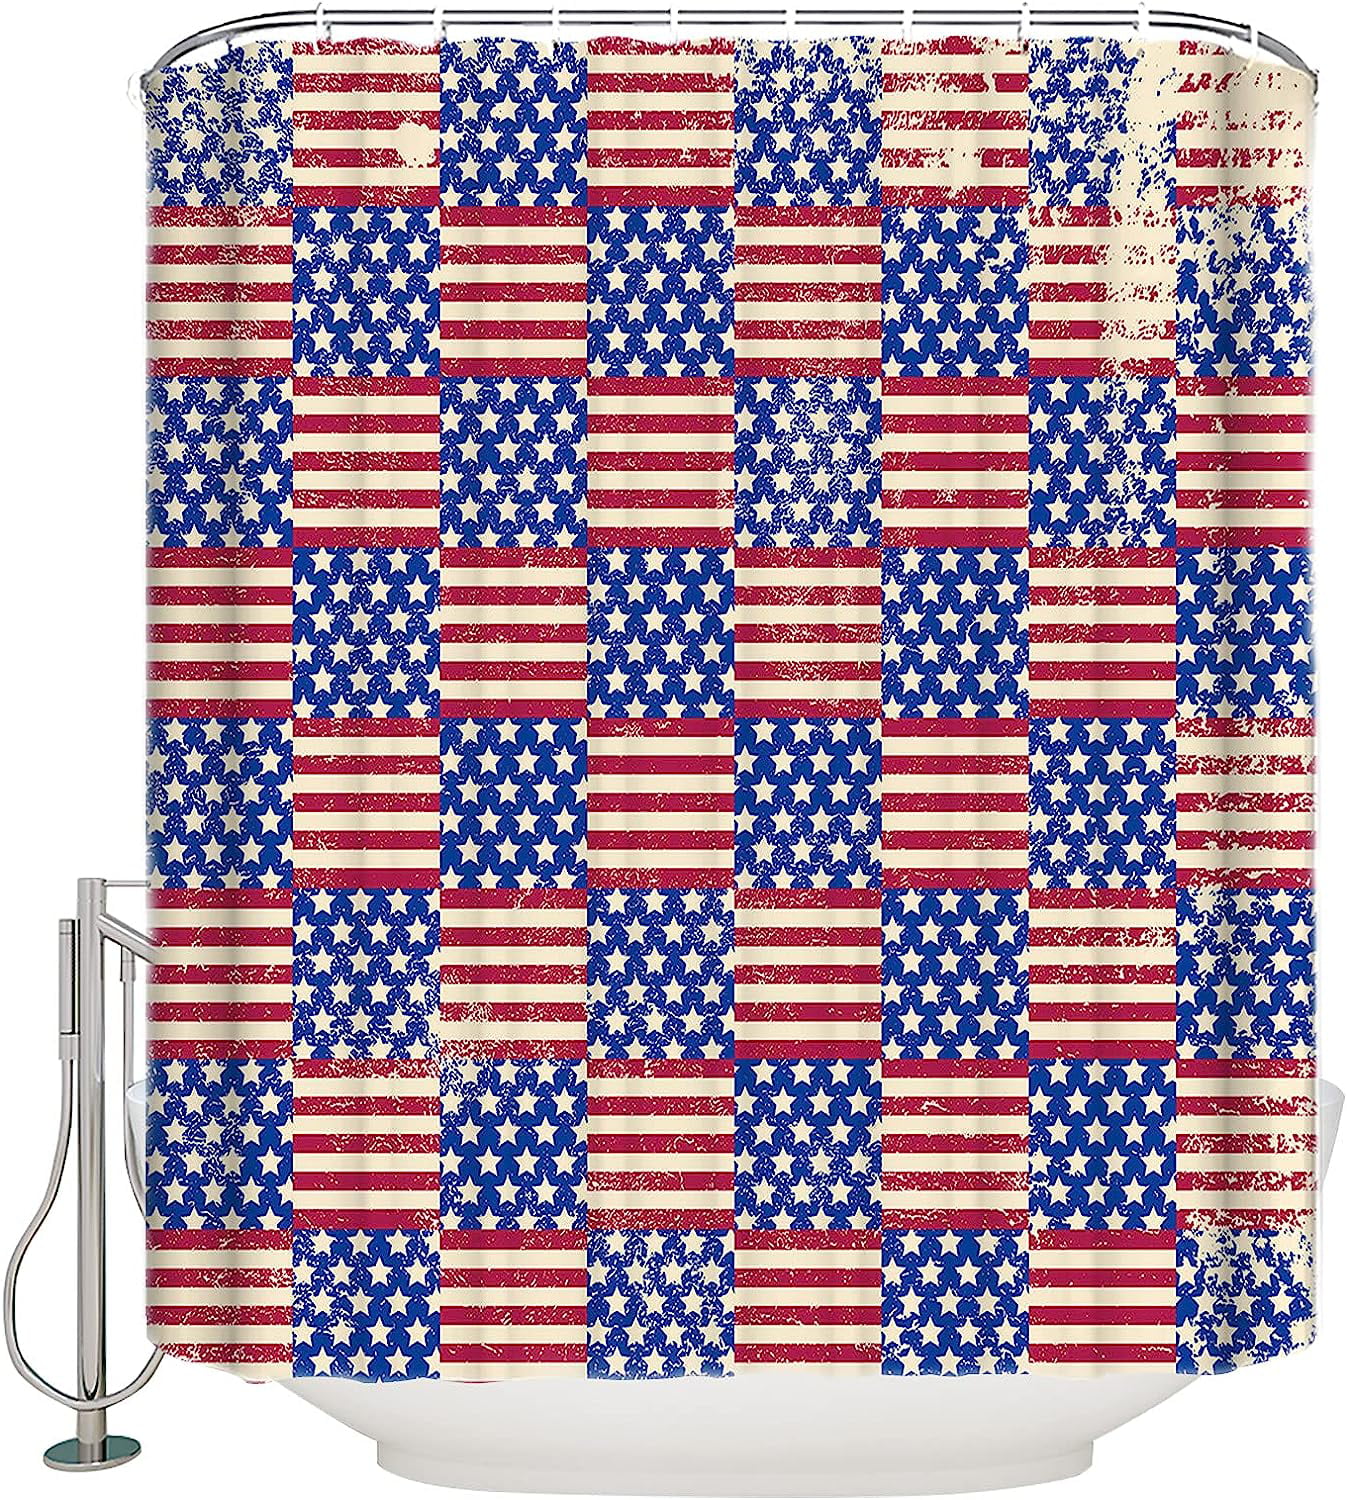 JOOCAR Shower Curtain Set with Hooks American Flag Stars Hearts 4th of July Shower  Curtain for Bathroom Check Plaid Stripe Waterproof Polyester Bath Curtain  Set for Independence Day 72x72 Inch 